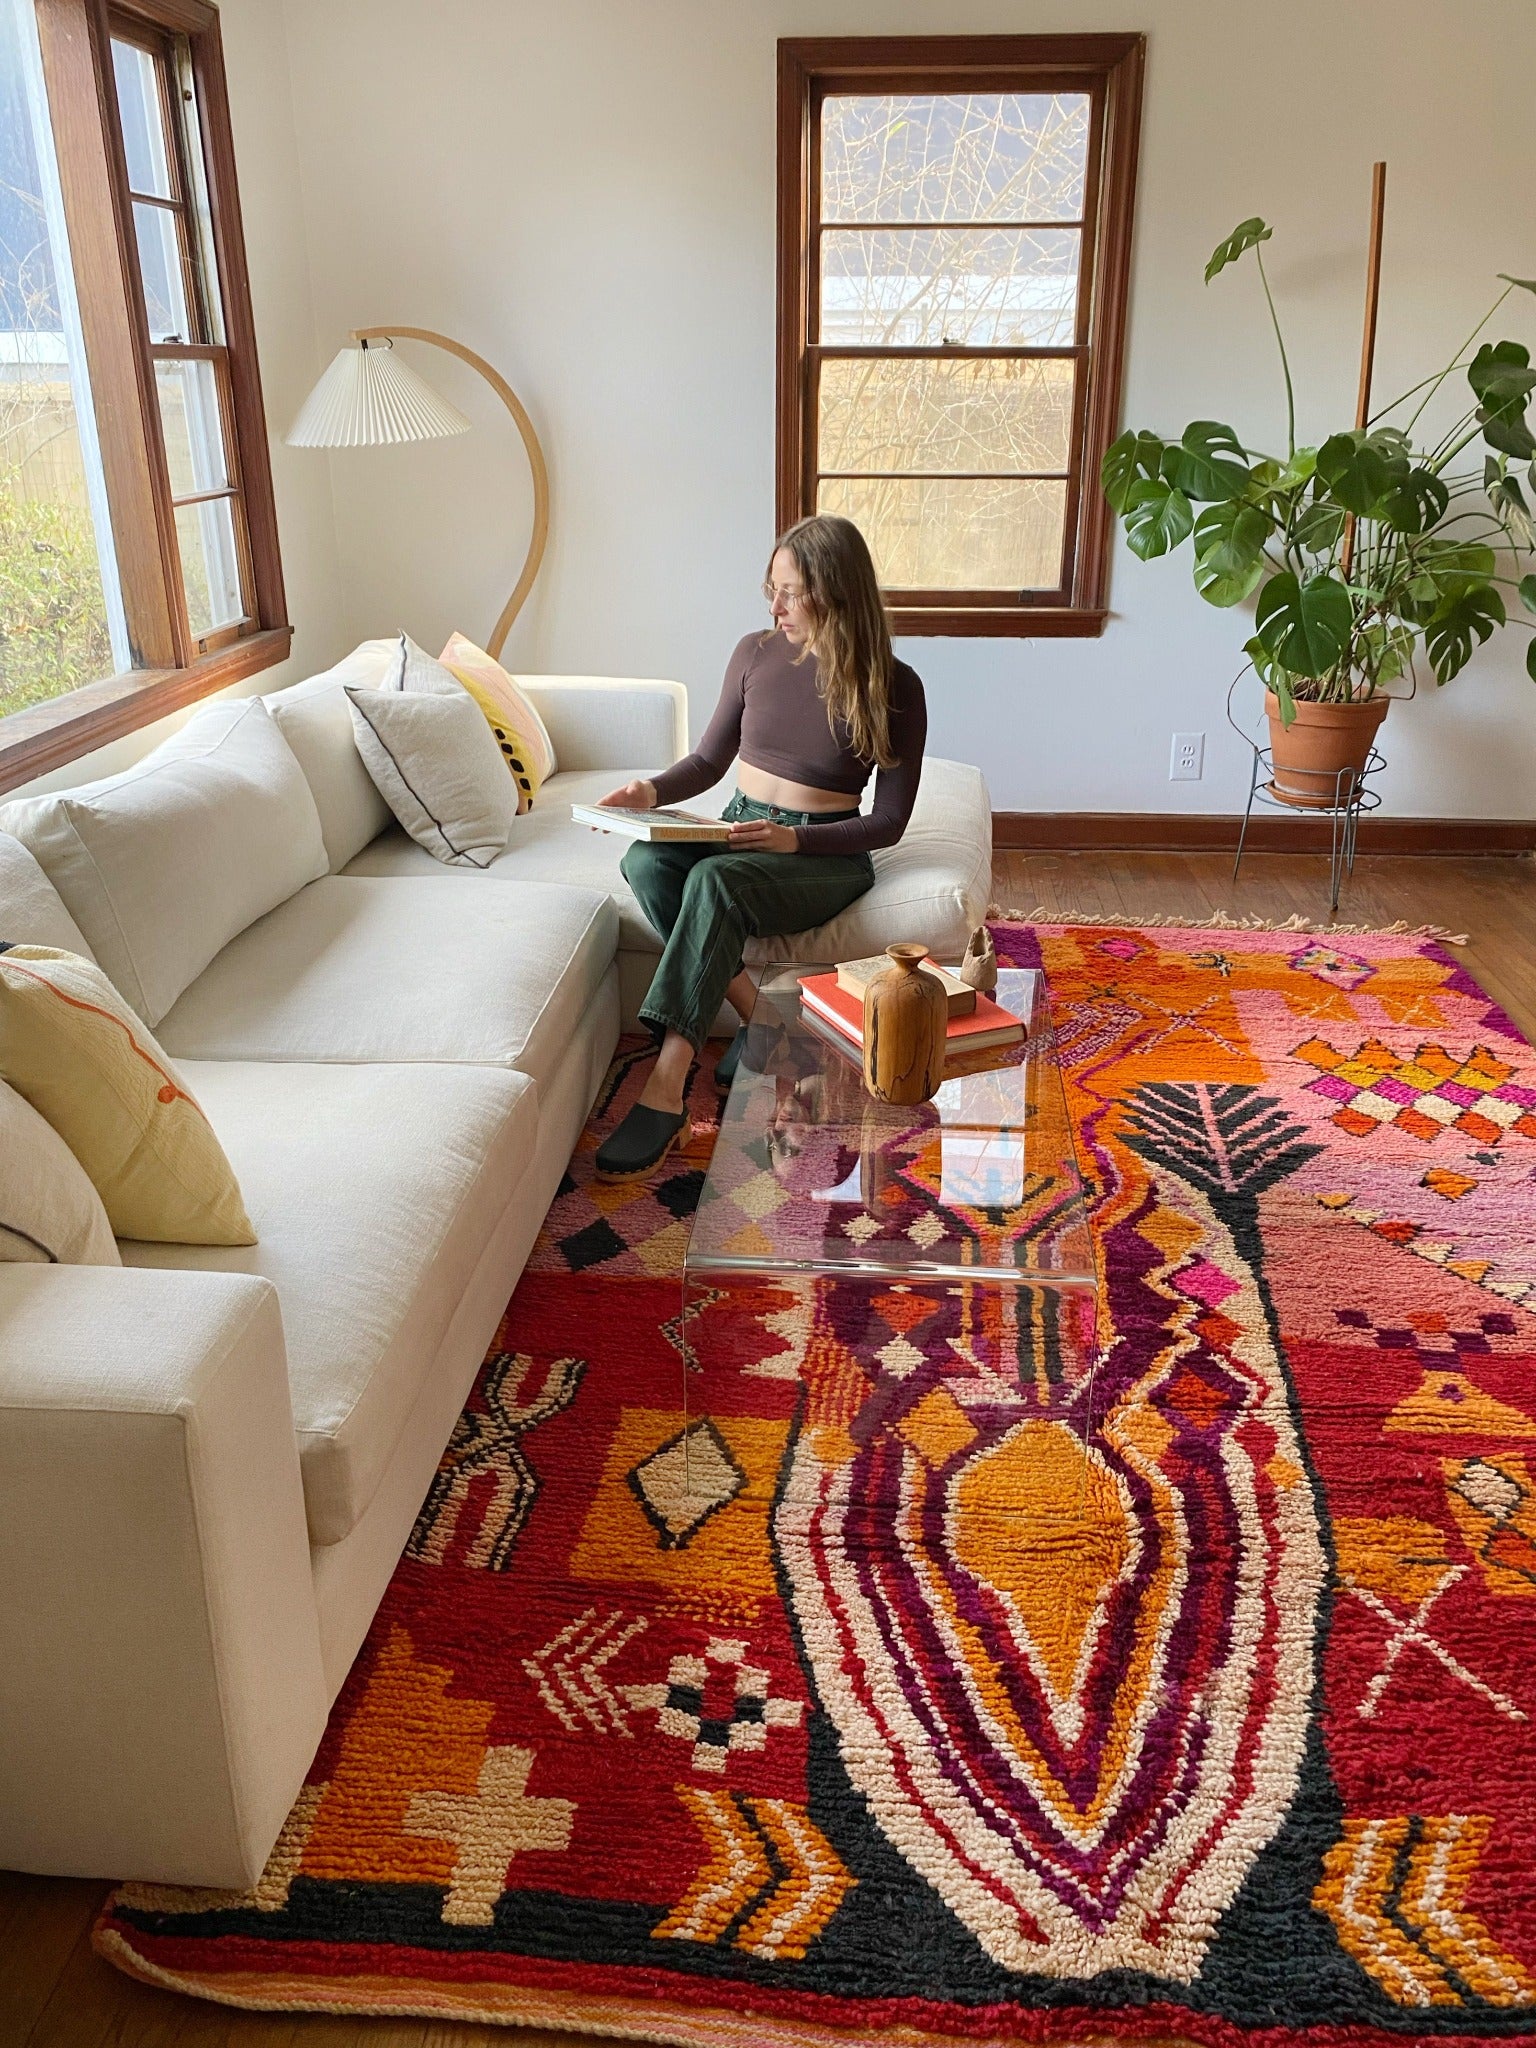 Style Wedelia Moroccan Rug in a LIving Room Space